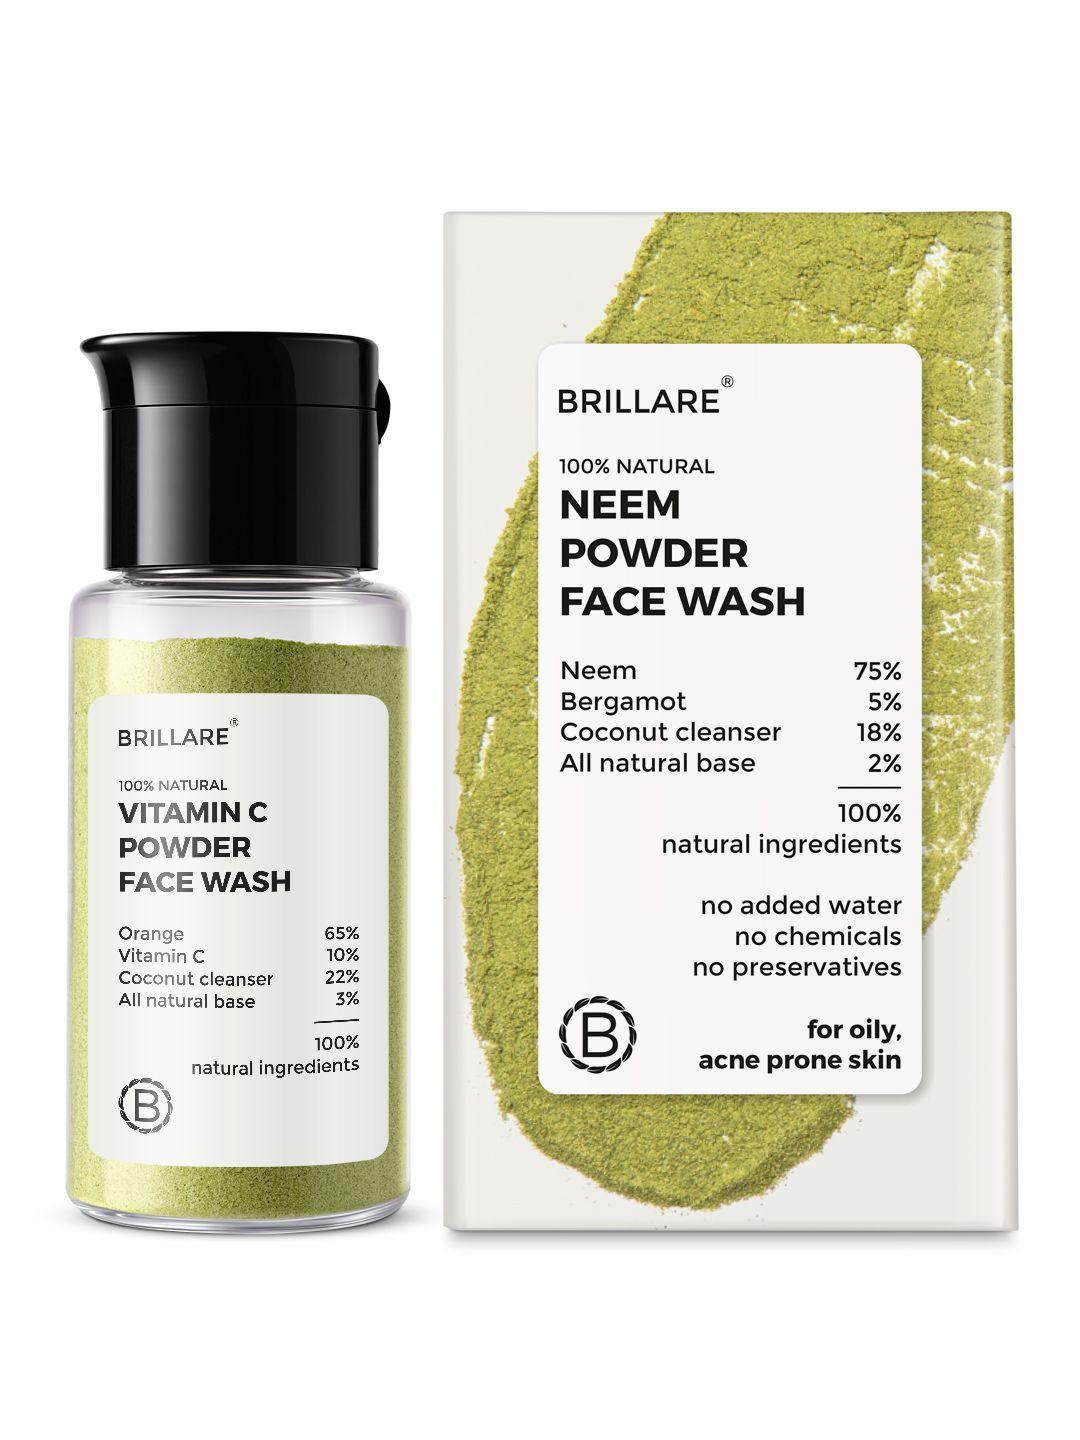 brillare neem powder sustainable face wash for acne prone skin - 15 g